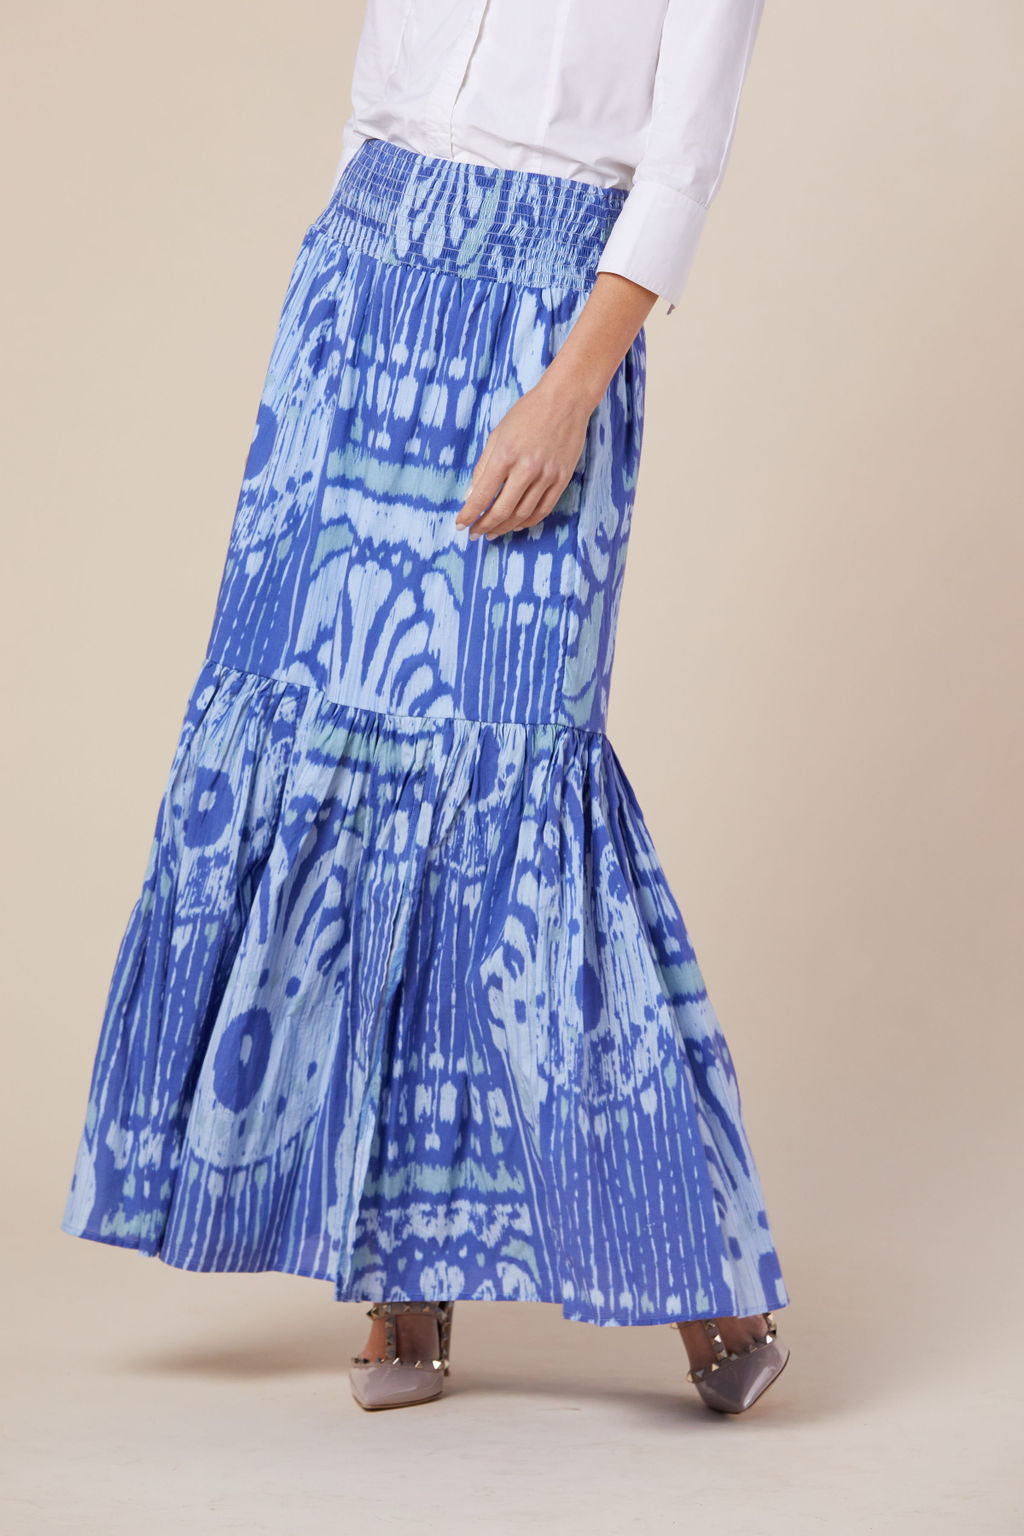 Madelyn Skirt in Blue Moroccan Ikat